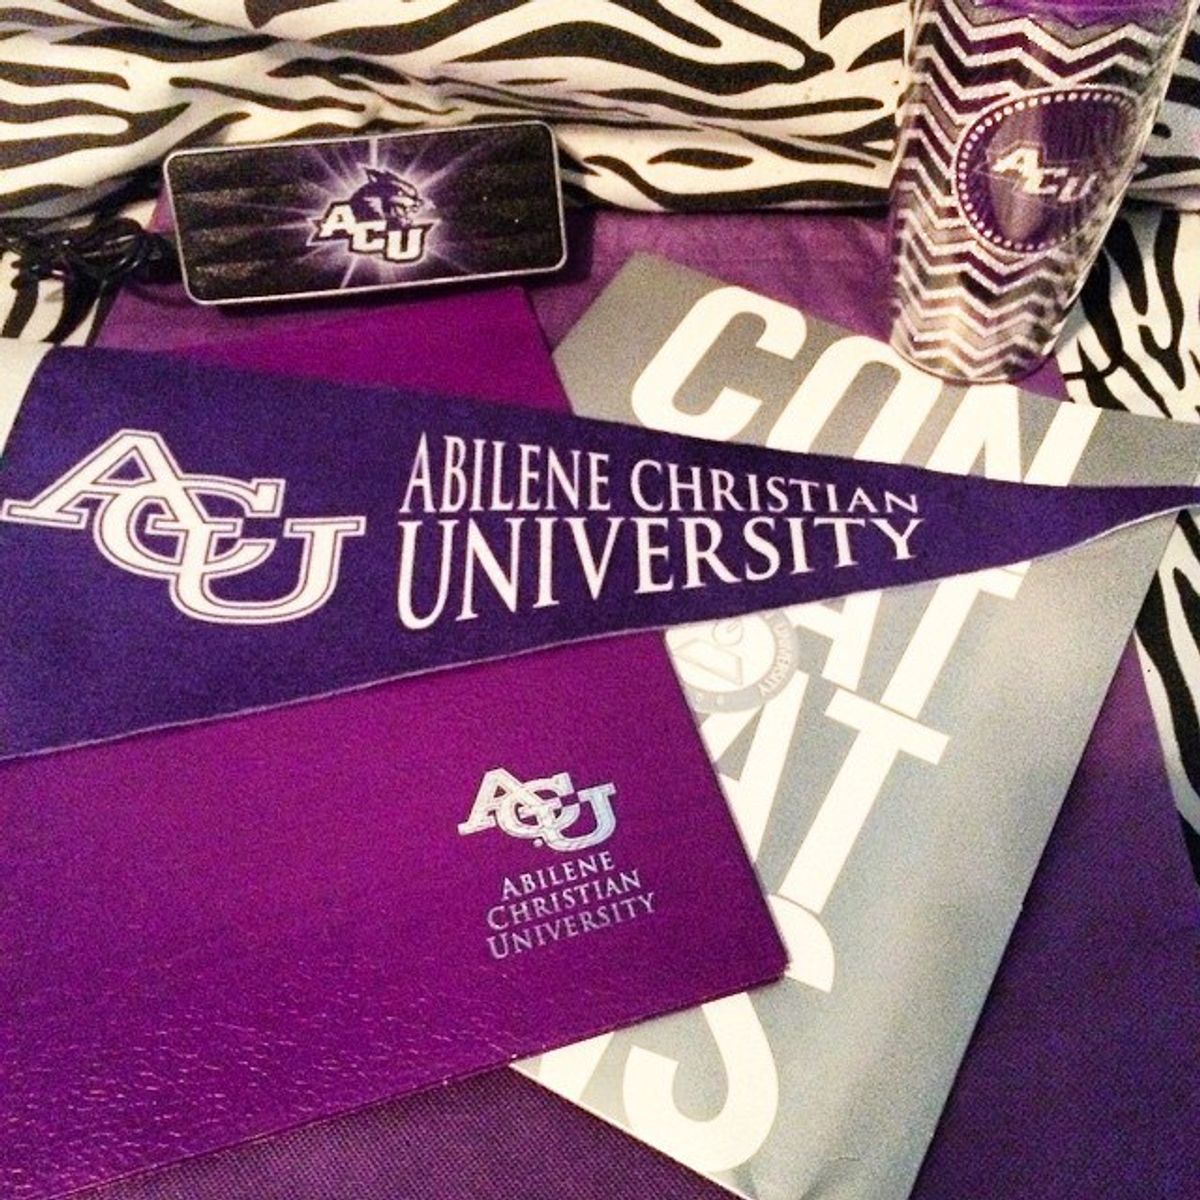 Why You Should Give Abilene Christian University A Second Look